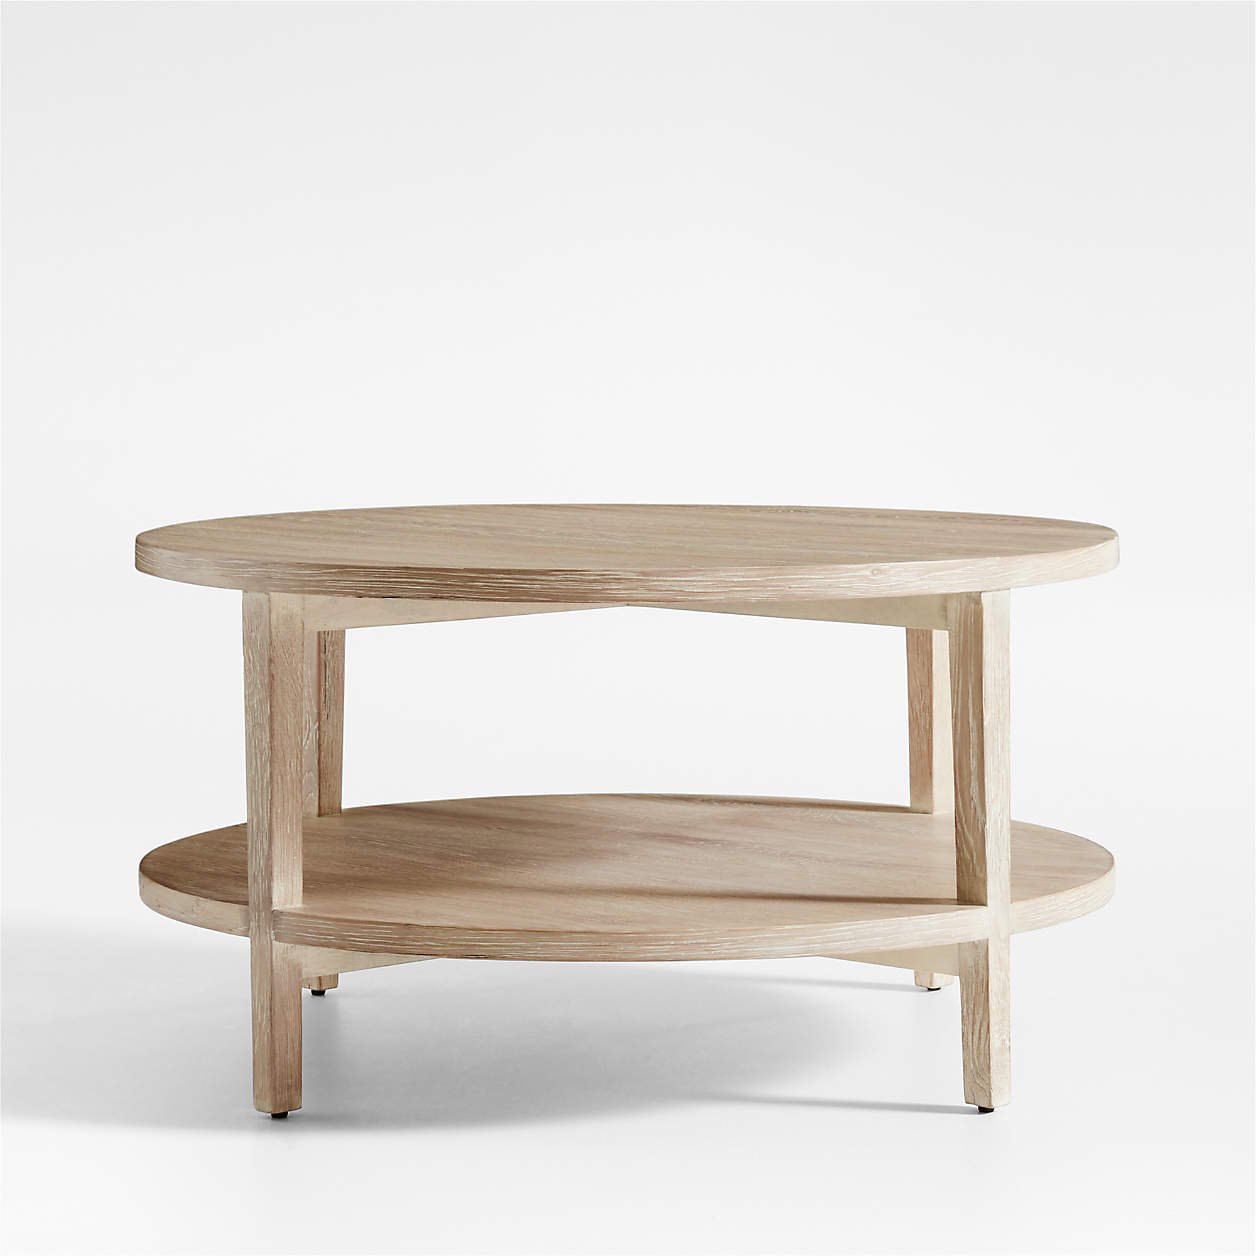 Clairemont Round Natural Coffee Table - Crate &amp; Barrel - $599